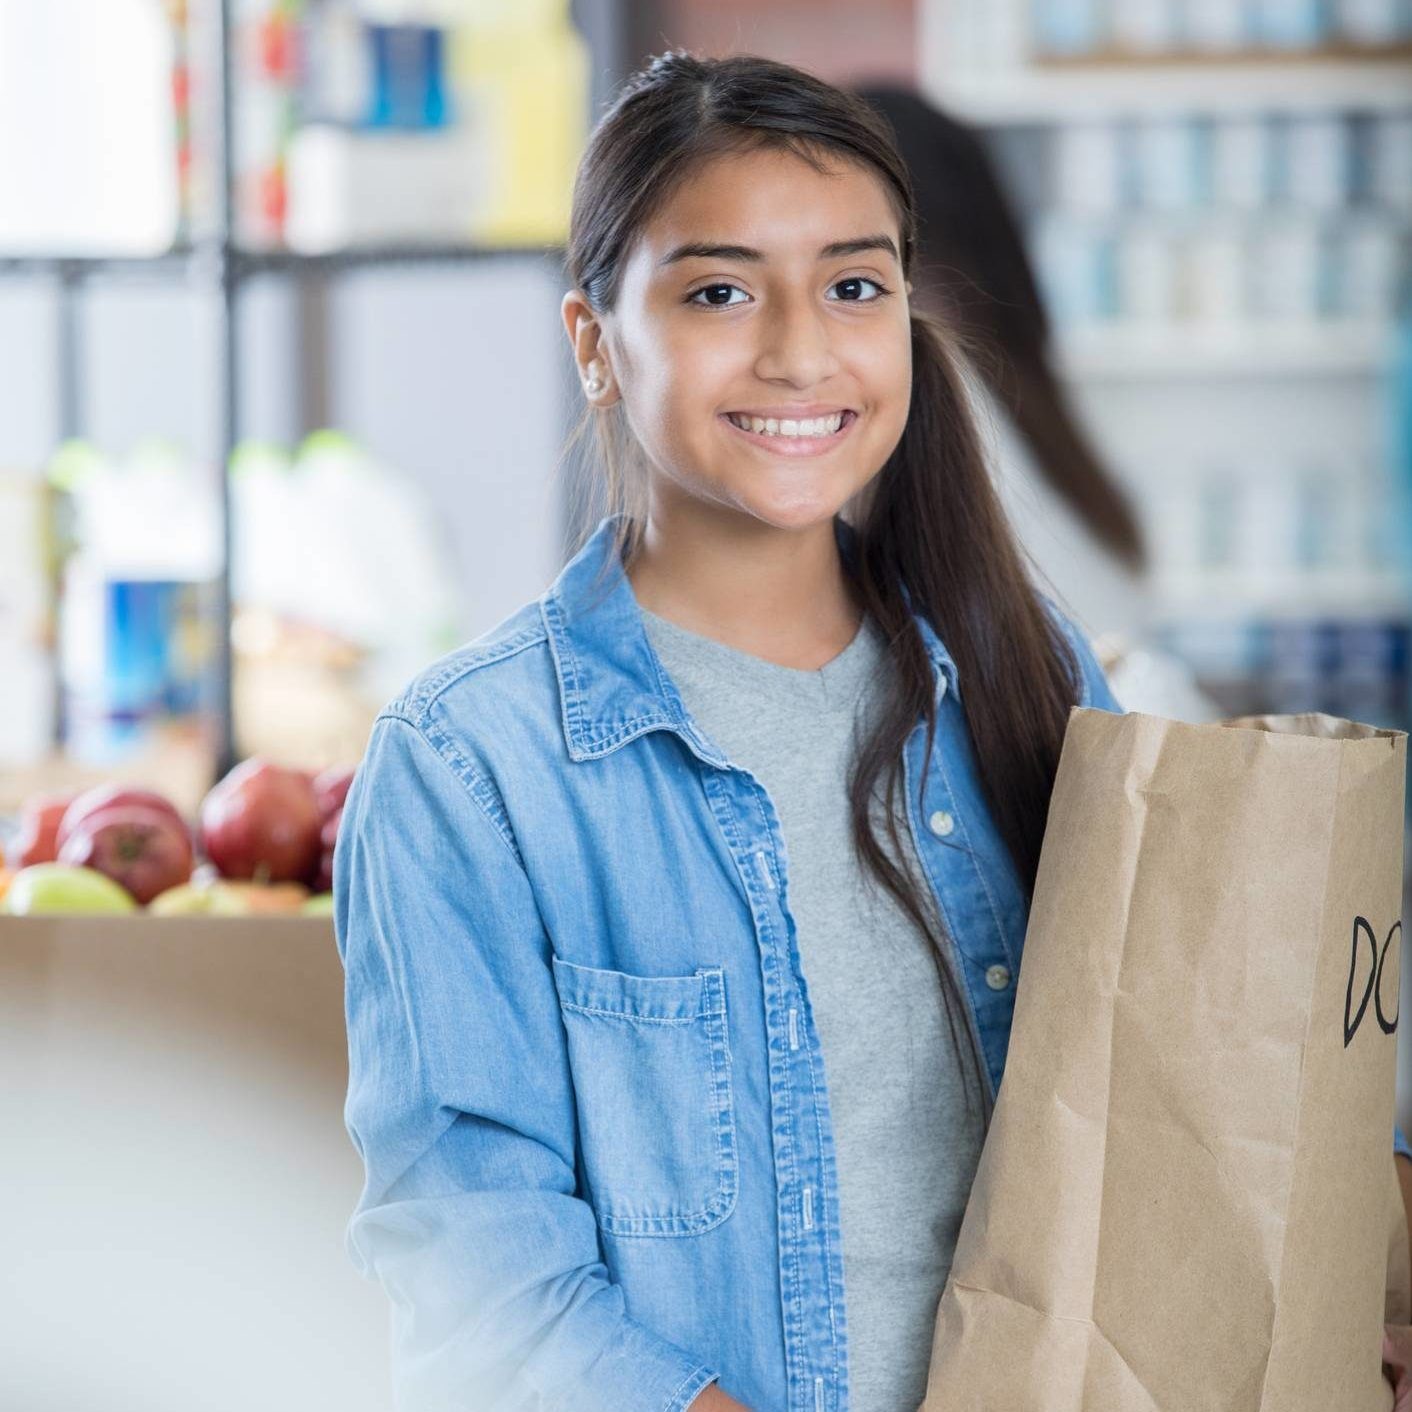 Pretty preteen girl holds a bag of donated groceries. She is volunteering in a community food bank.